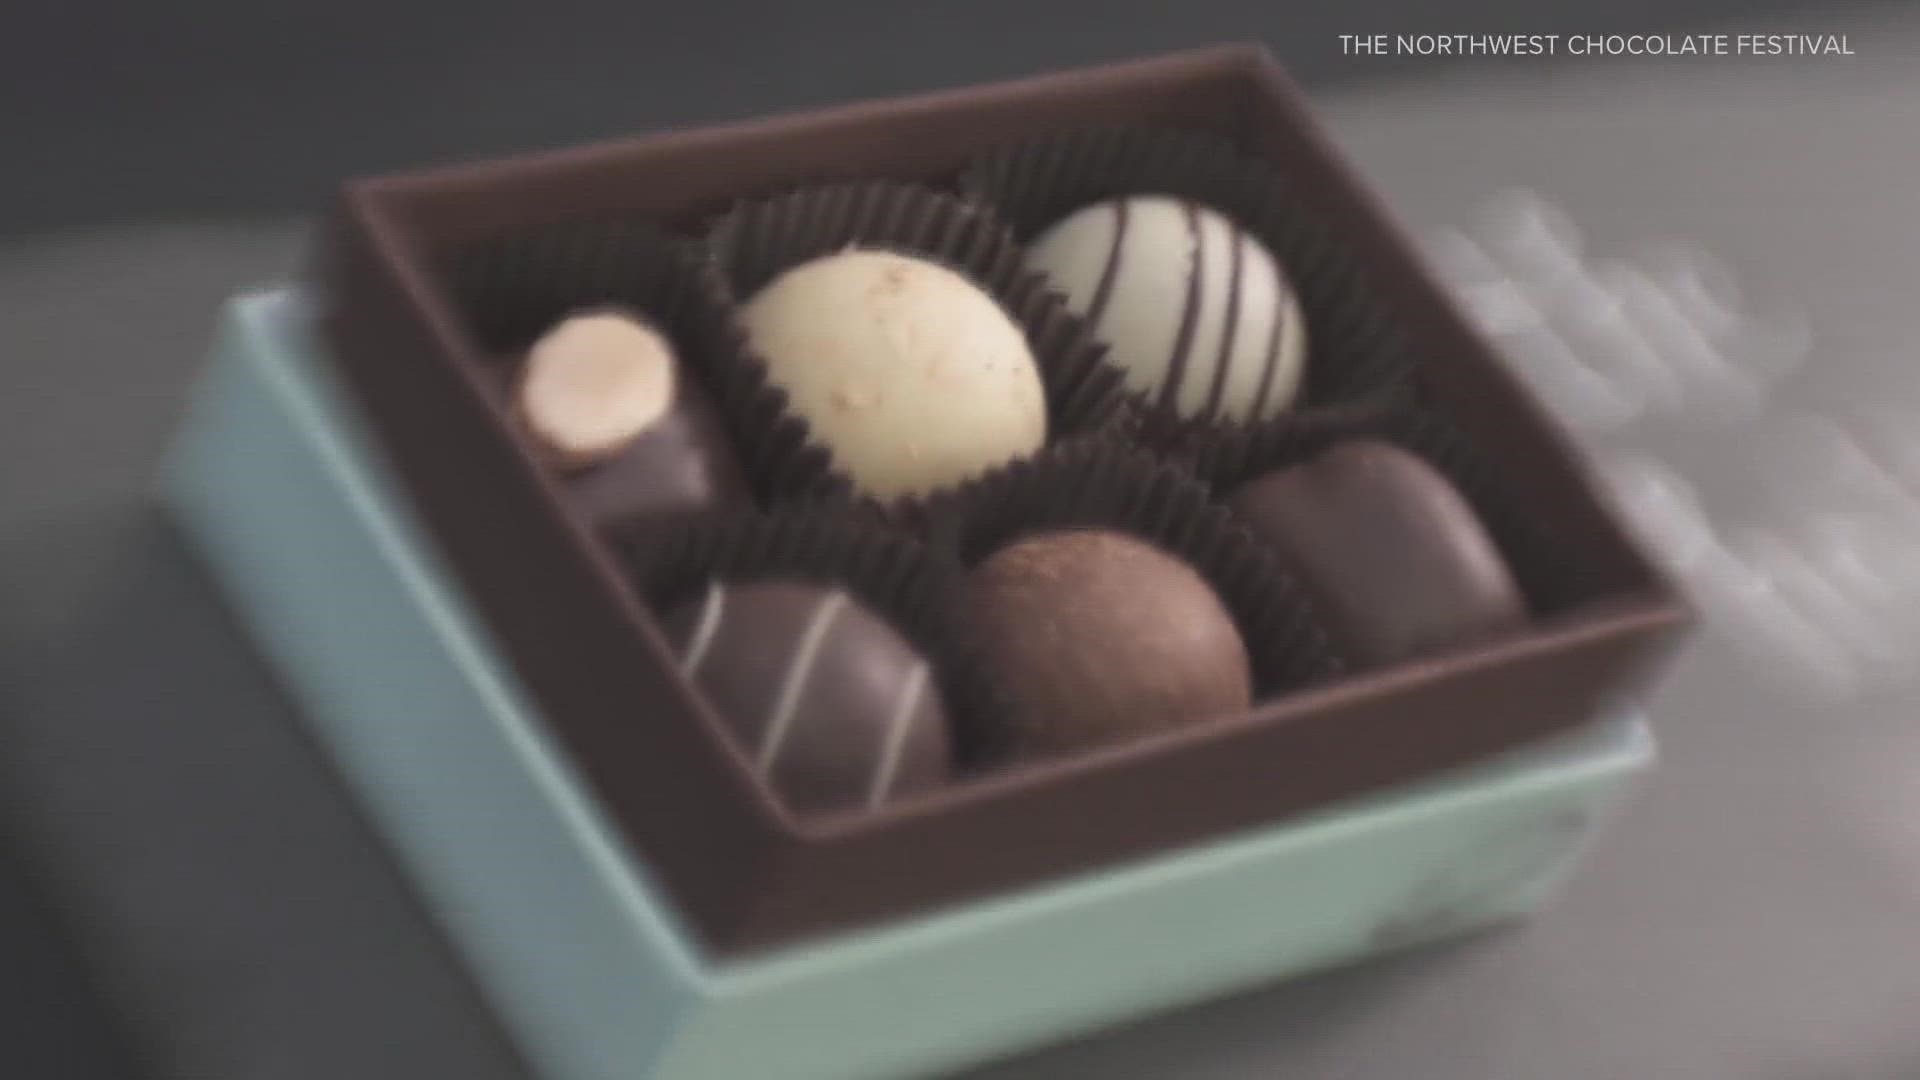 The 14th annual Northwest Chocolate Festival is coming to Pier 66 in Seattle this weekend